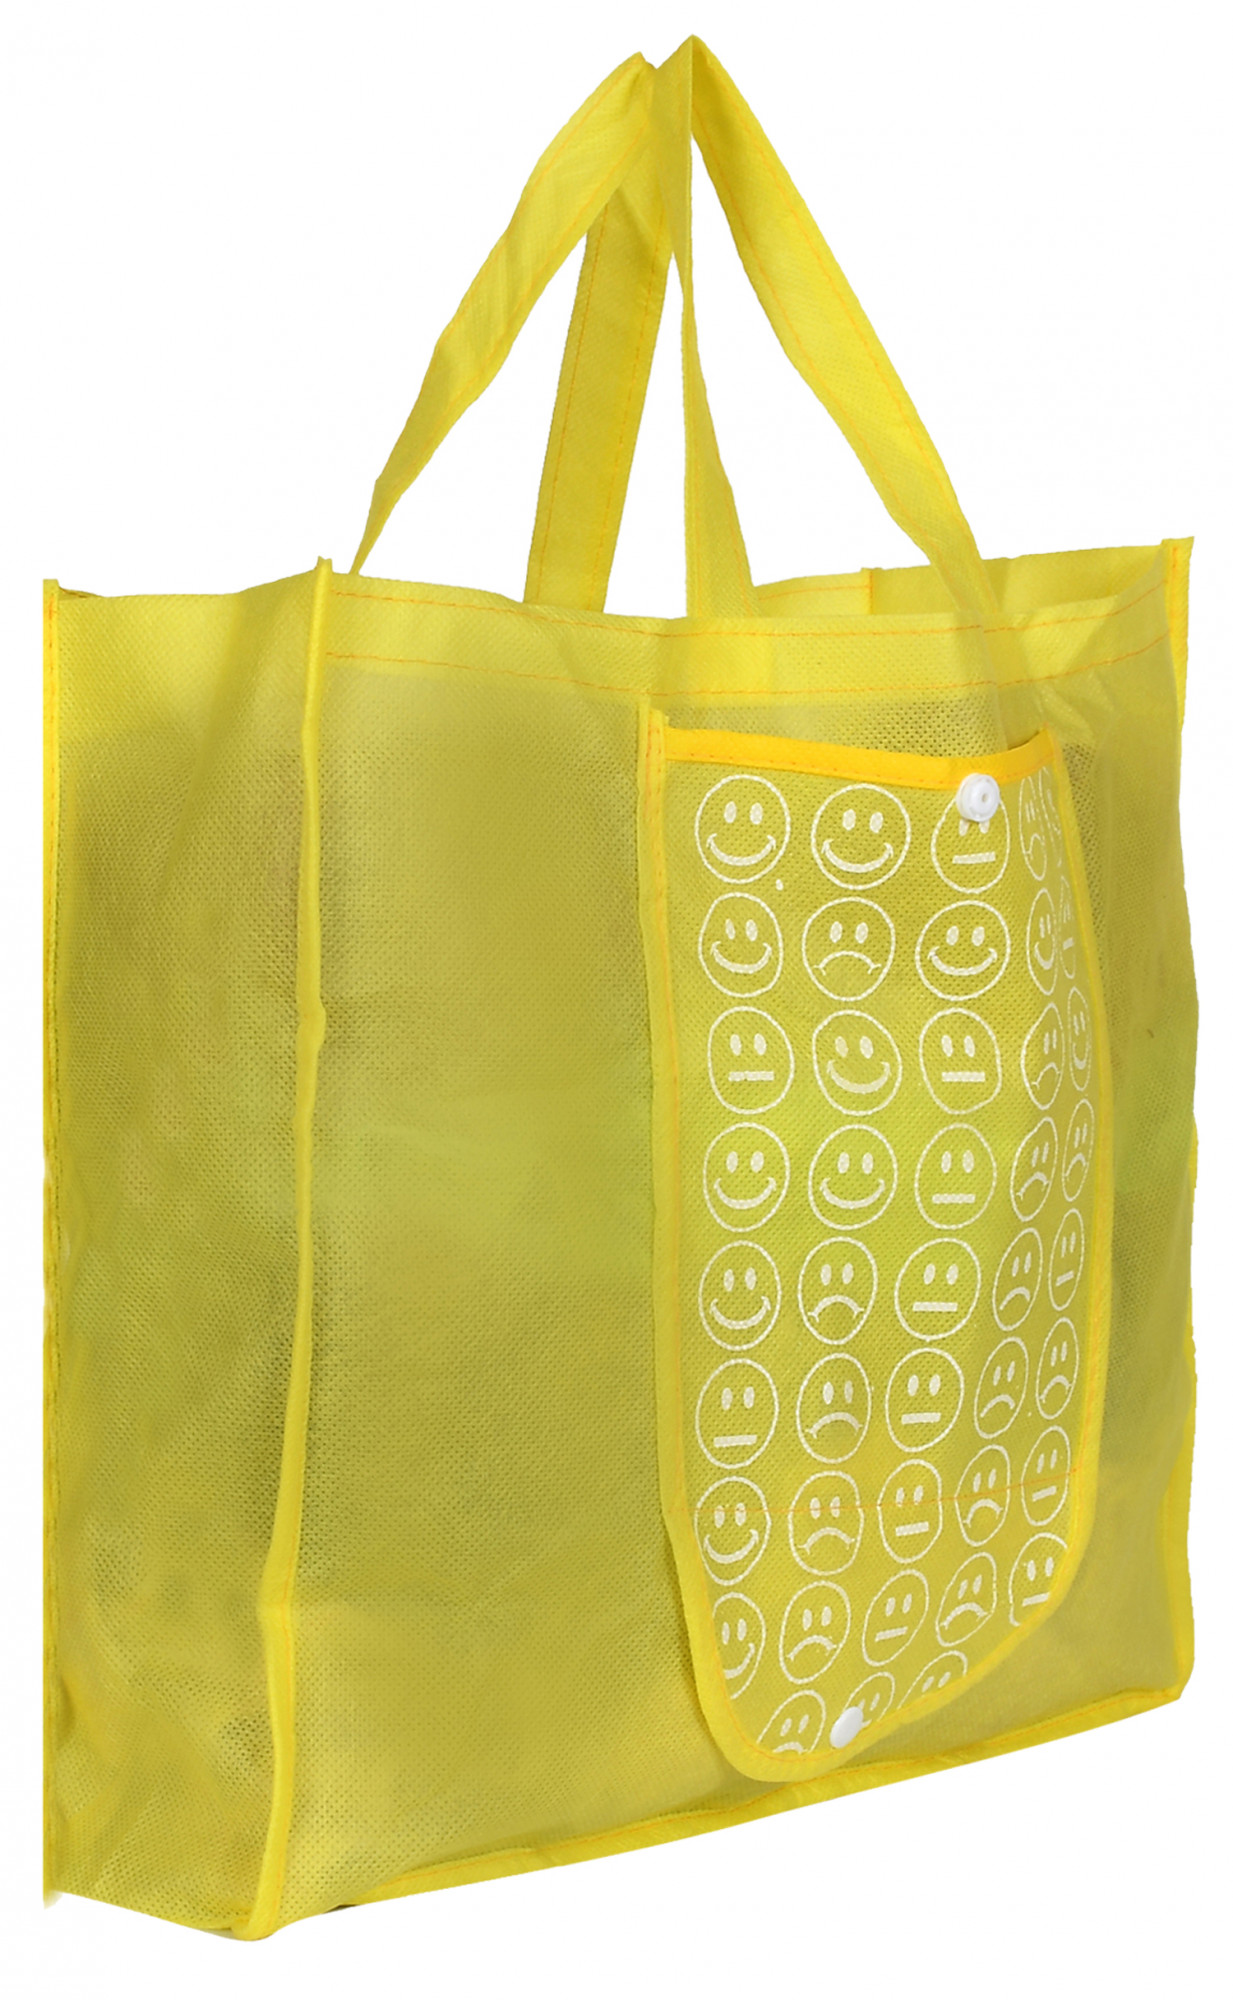 Kuber Industries Shopping Grocery Bags Foldable, Washable Grocery Tote Bag with One Small Pocket, Eco-Friendly Purse Bag Fits in Pocket Waterproof & Lightweight (Orange & Green & Yellow)